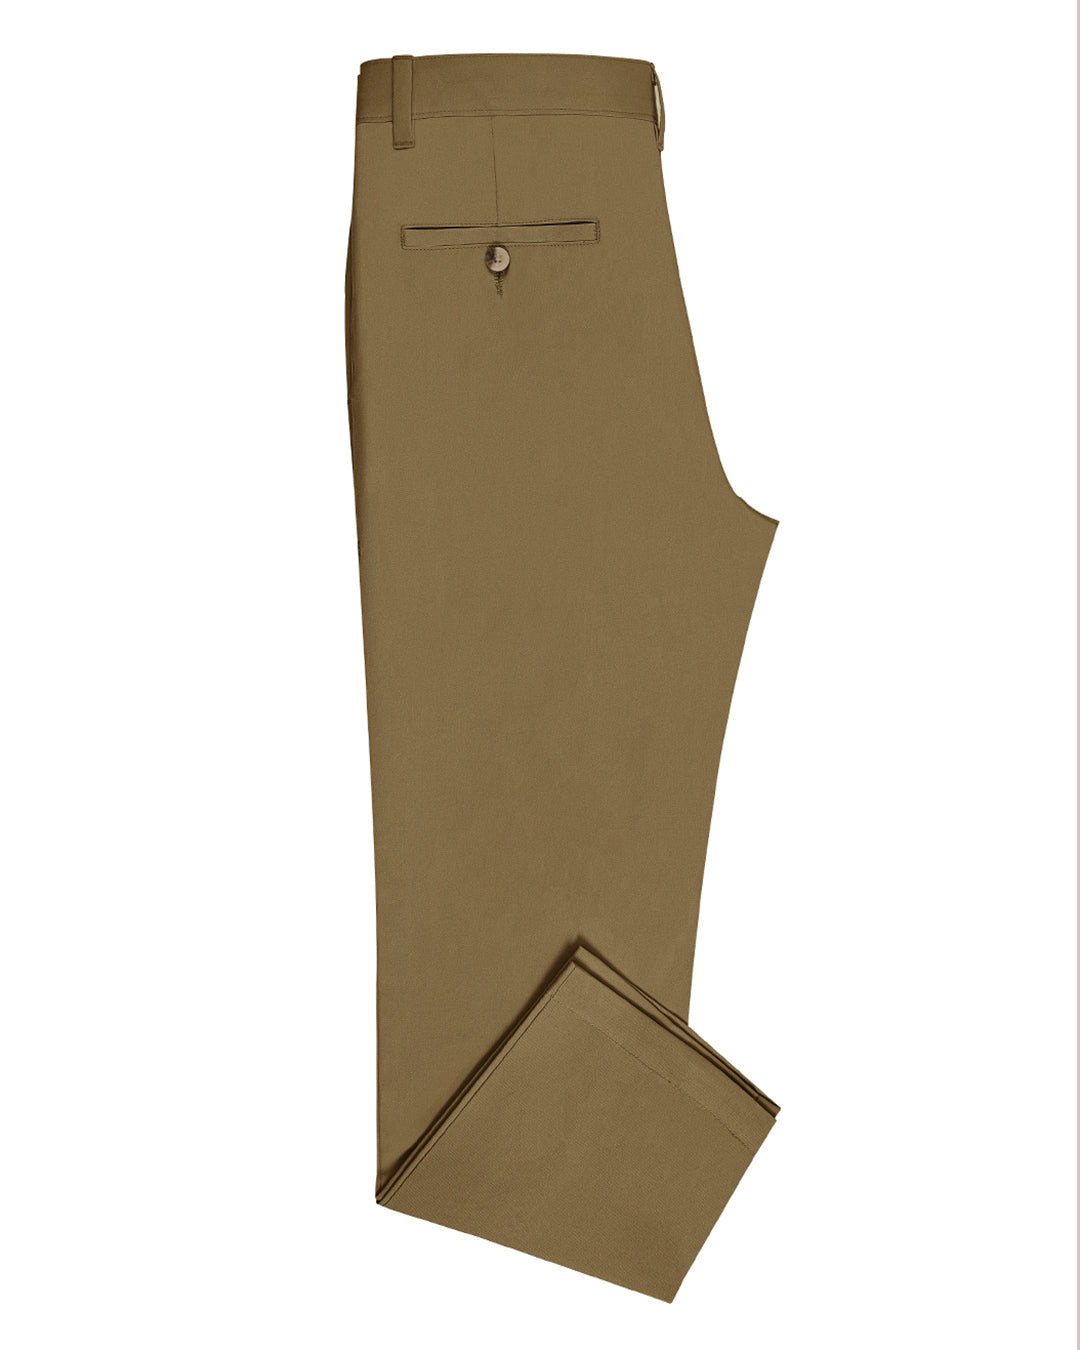 Side view of custom Genoa Chino pants for men by Luxire in light copper